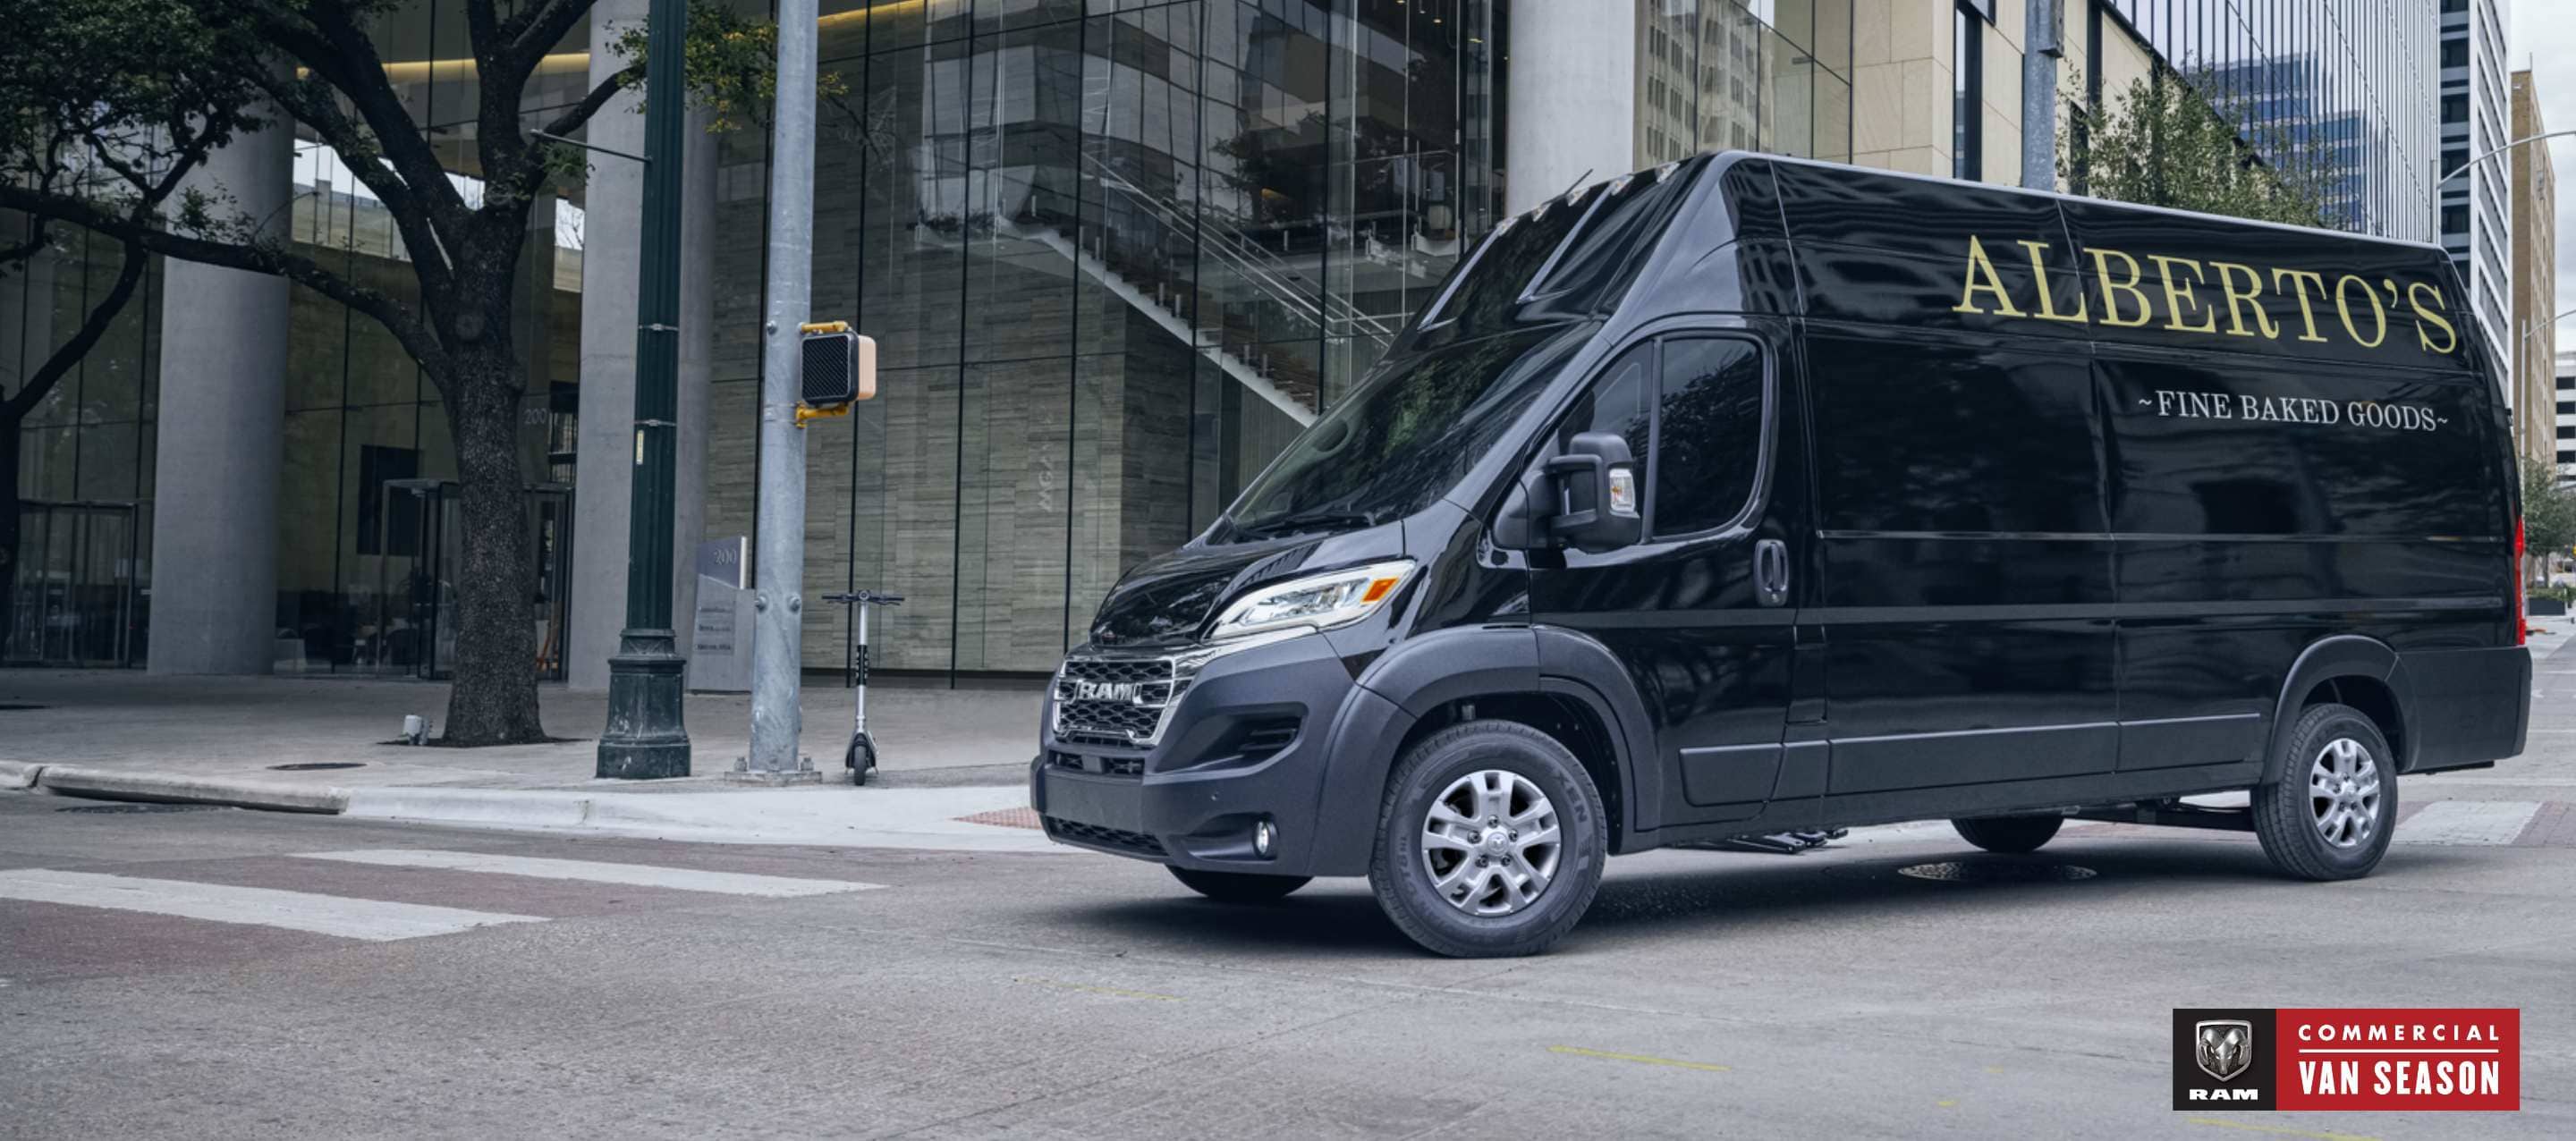 A black 2024 Ram ProMaster 3500 SLT Super High Roof Cargo Van with bakery signage on its driver-side high roof panels, making a right turn at a lighted intersection on a city street. Ram Commercial Van Season.